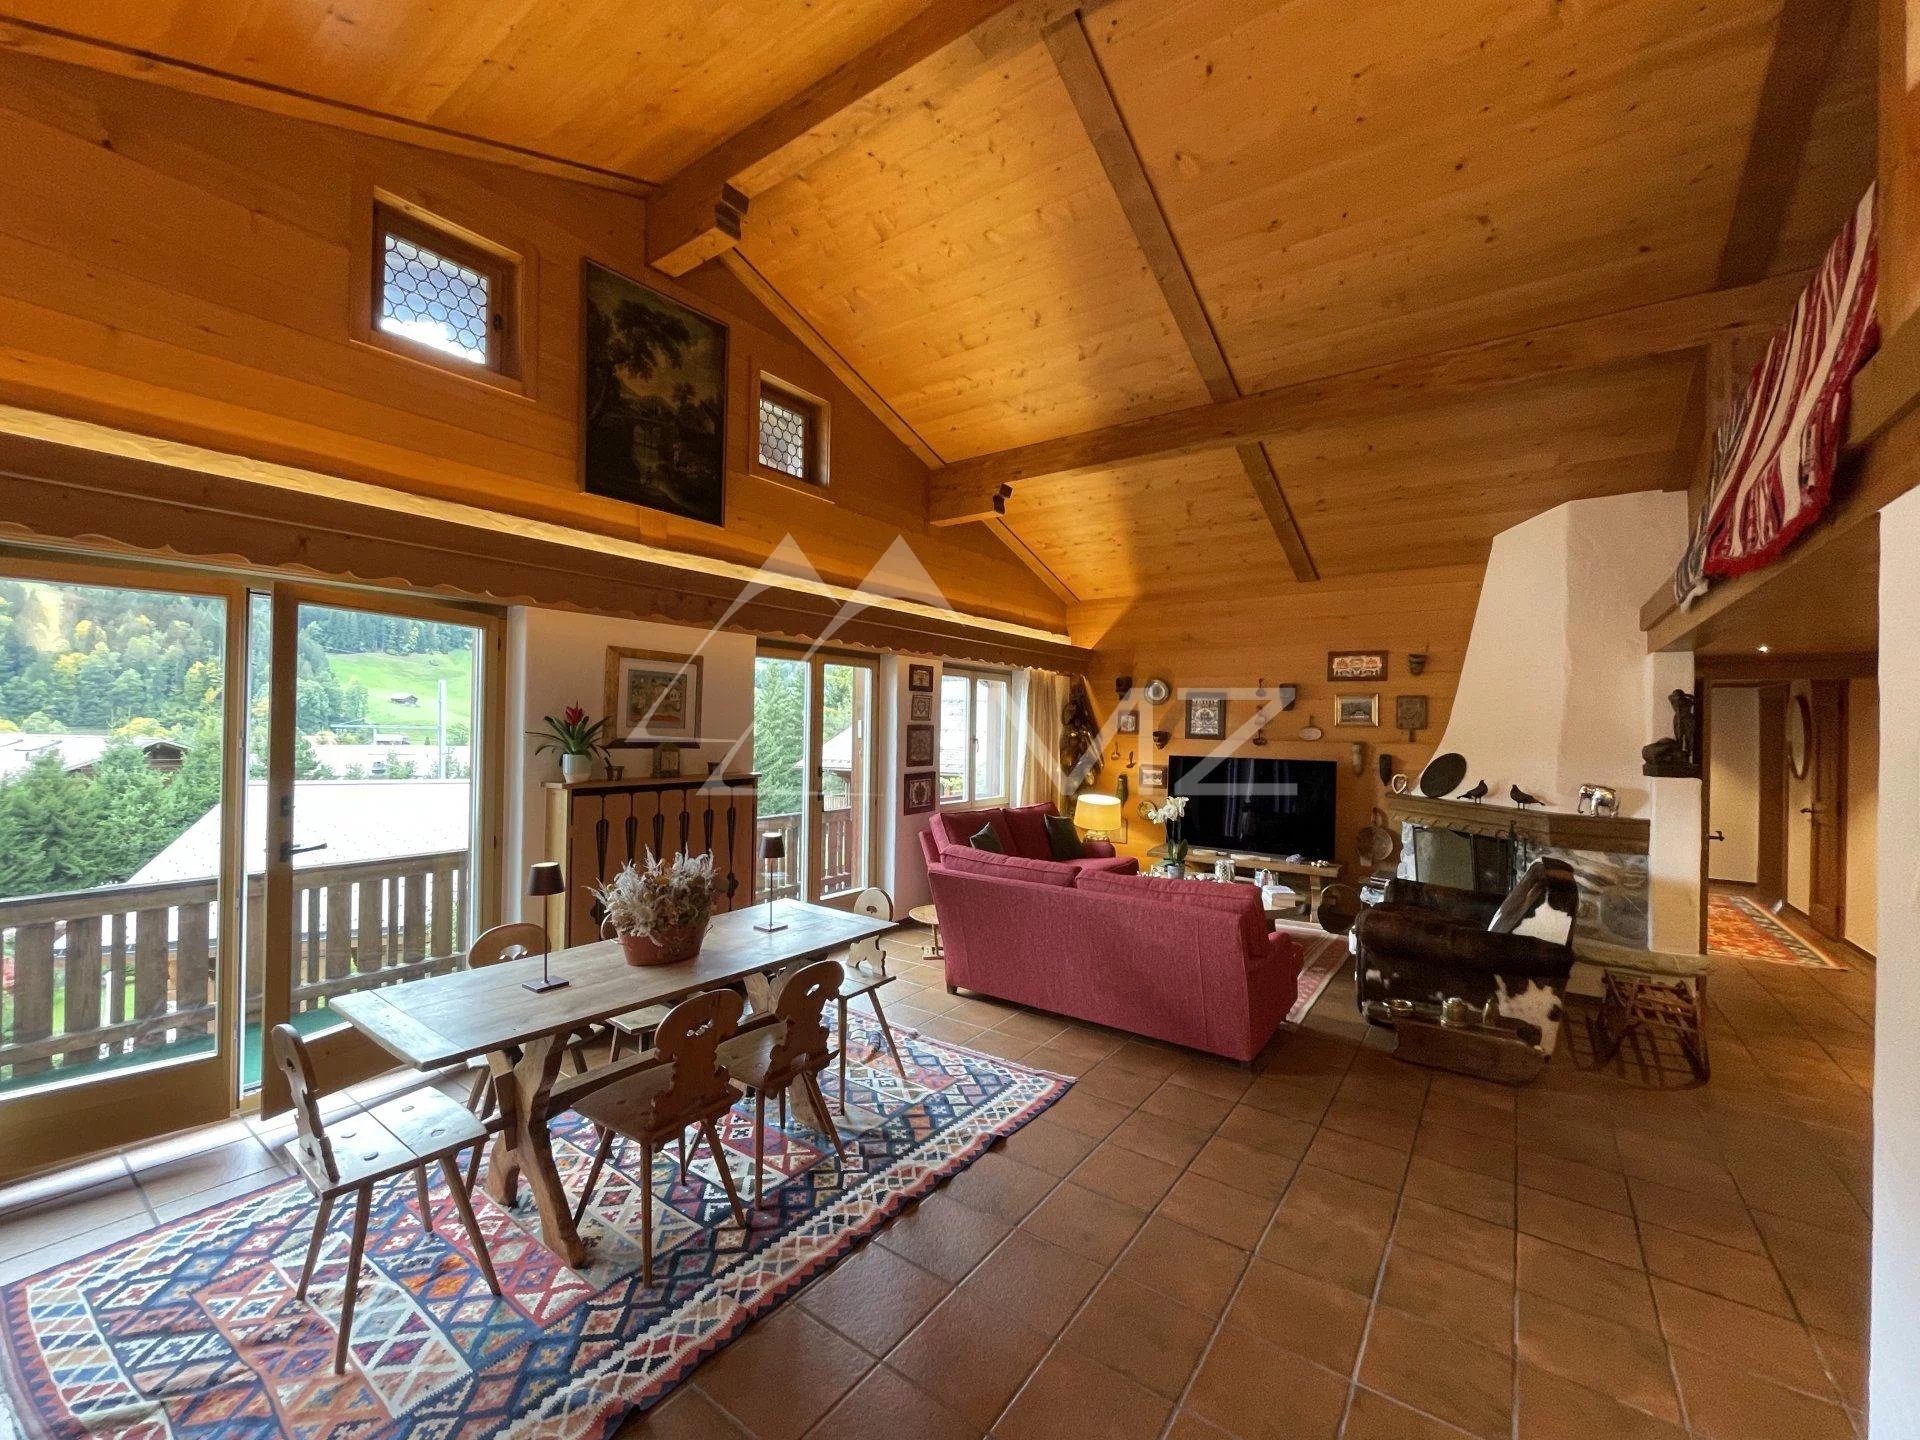 Top floor apartment in the center of Gstaad